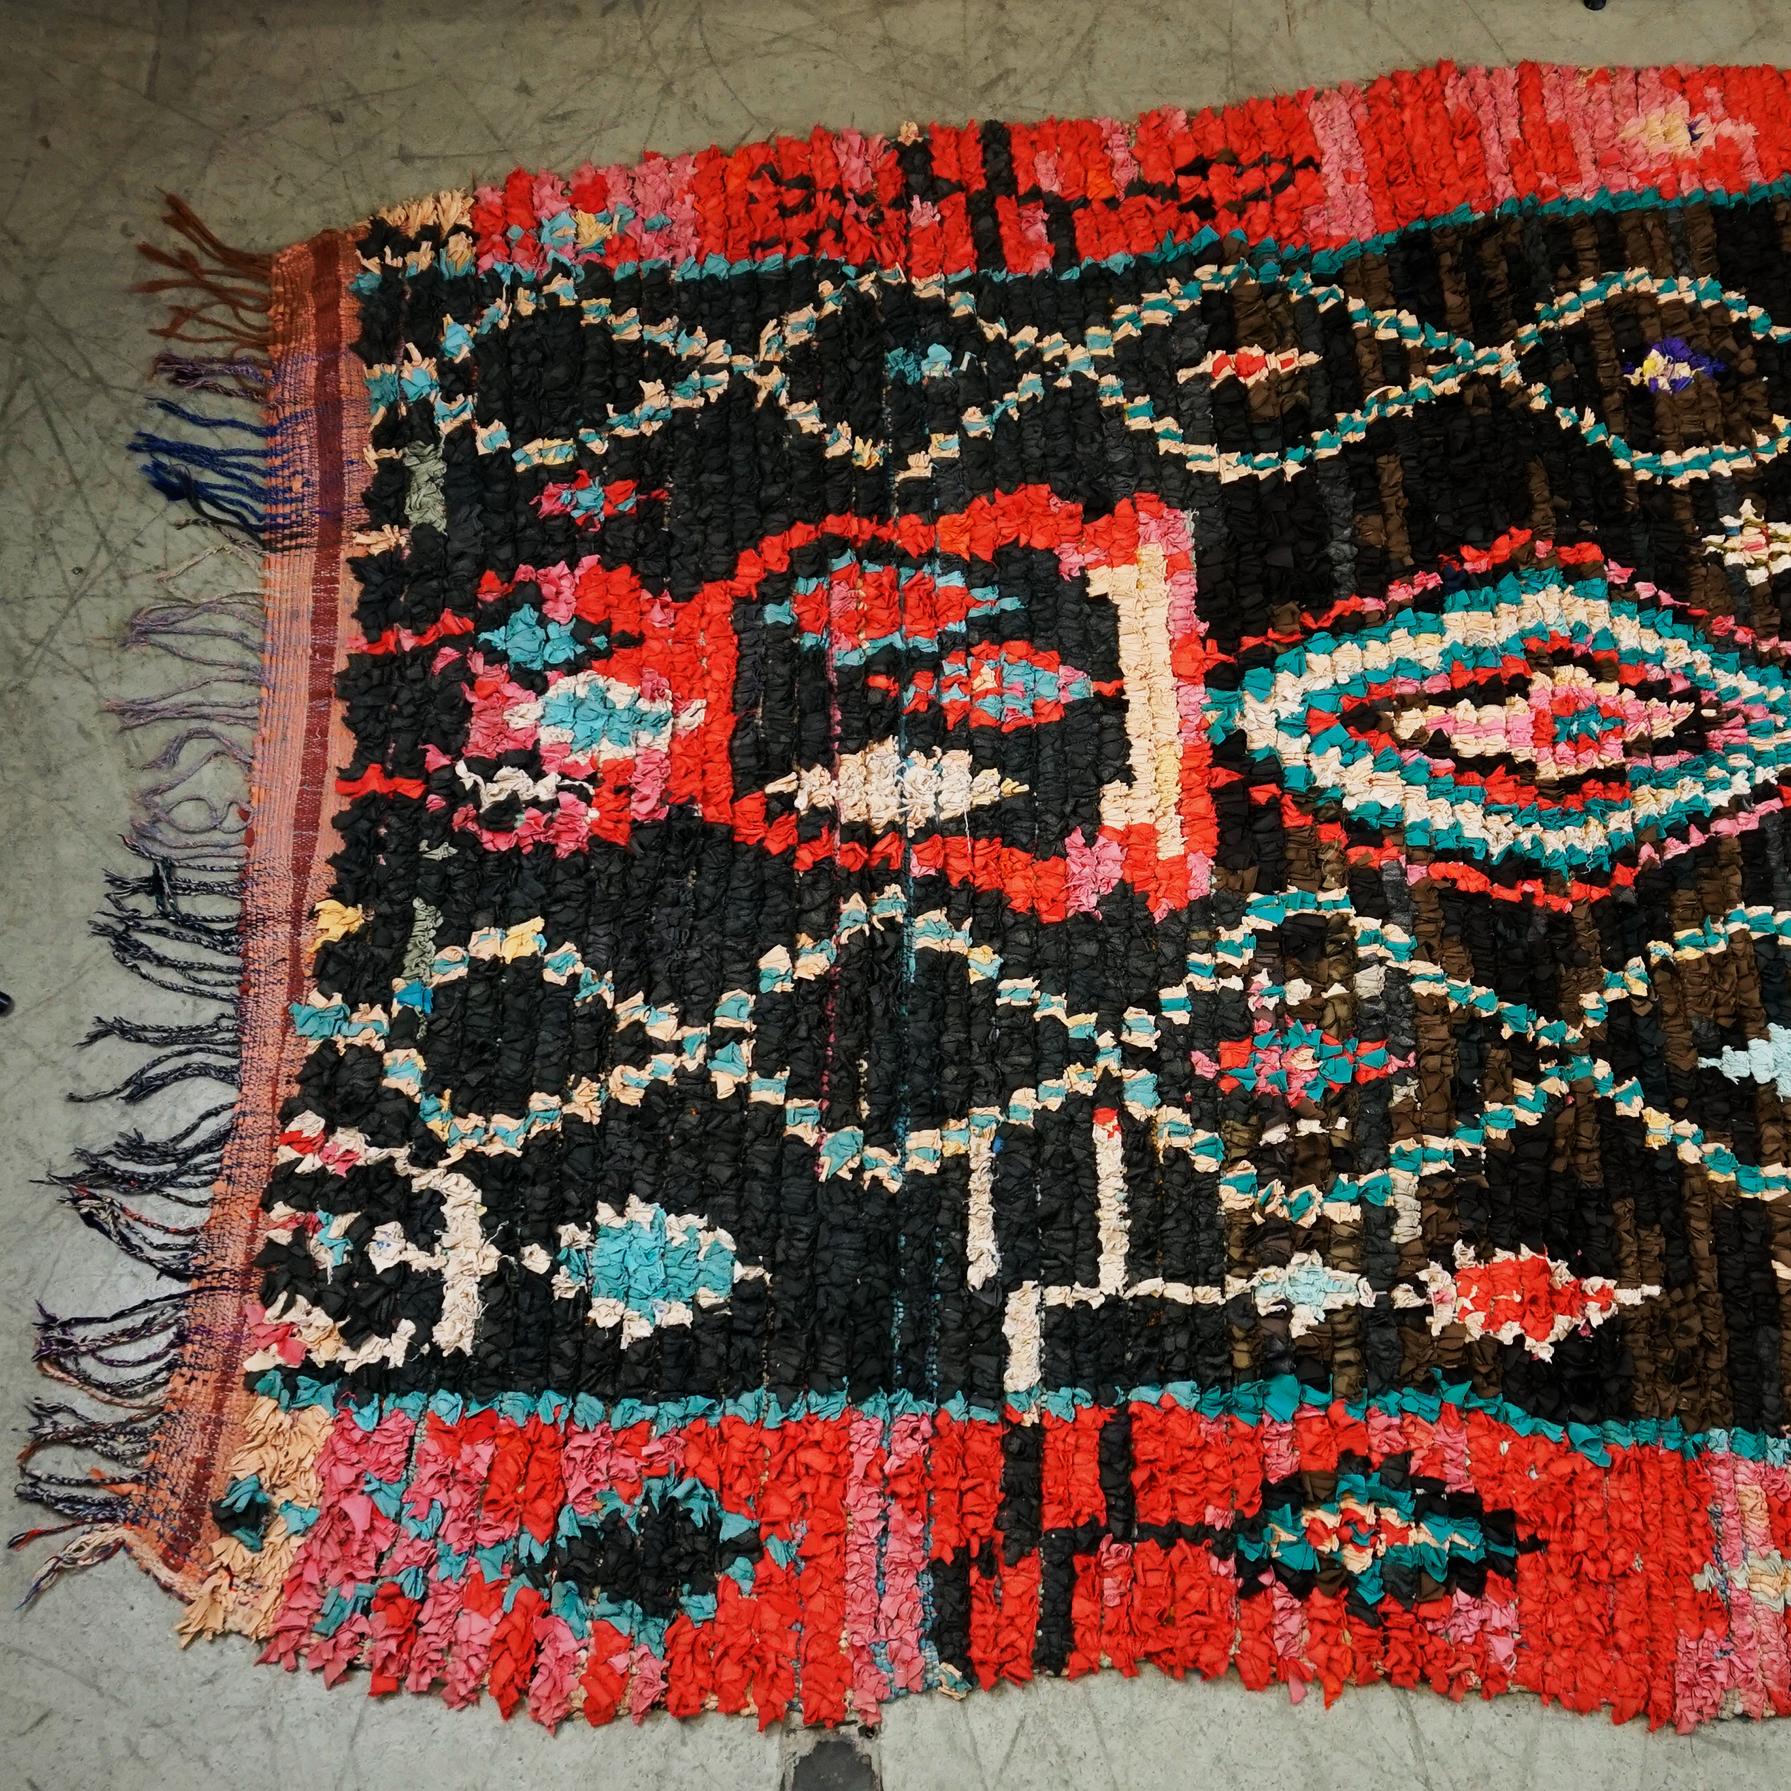 Charming Multicoloured Vintage Berber Moroccan Boucherouite rug with boho chic tribal style. This hand-knotted wool vintage Berber Moroccan rug features nearly Black and strong colours like red orange, turquoise, yellow, rose and creme white.
Though